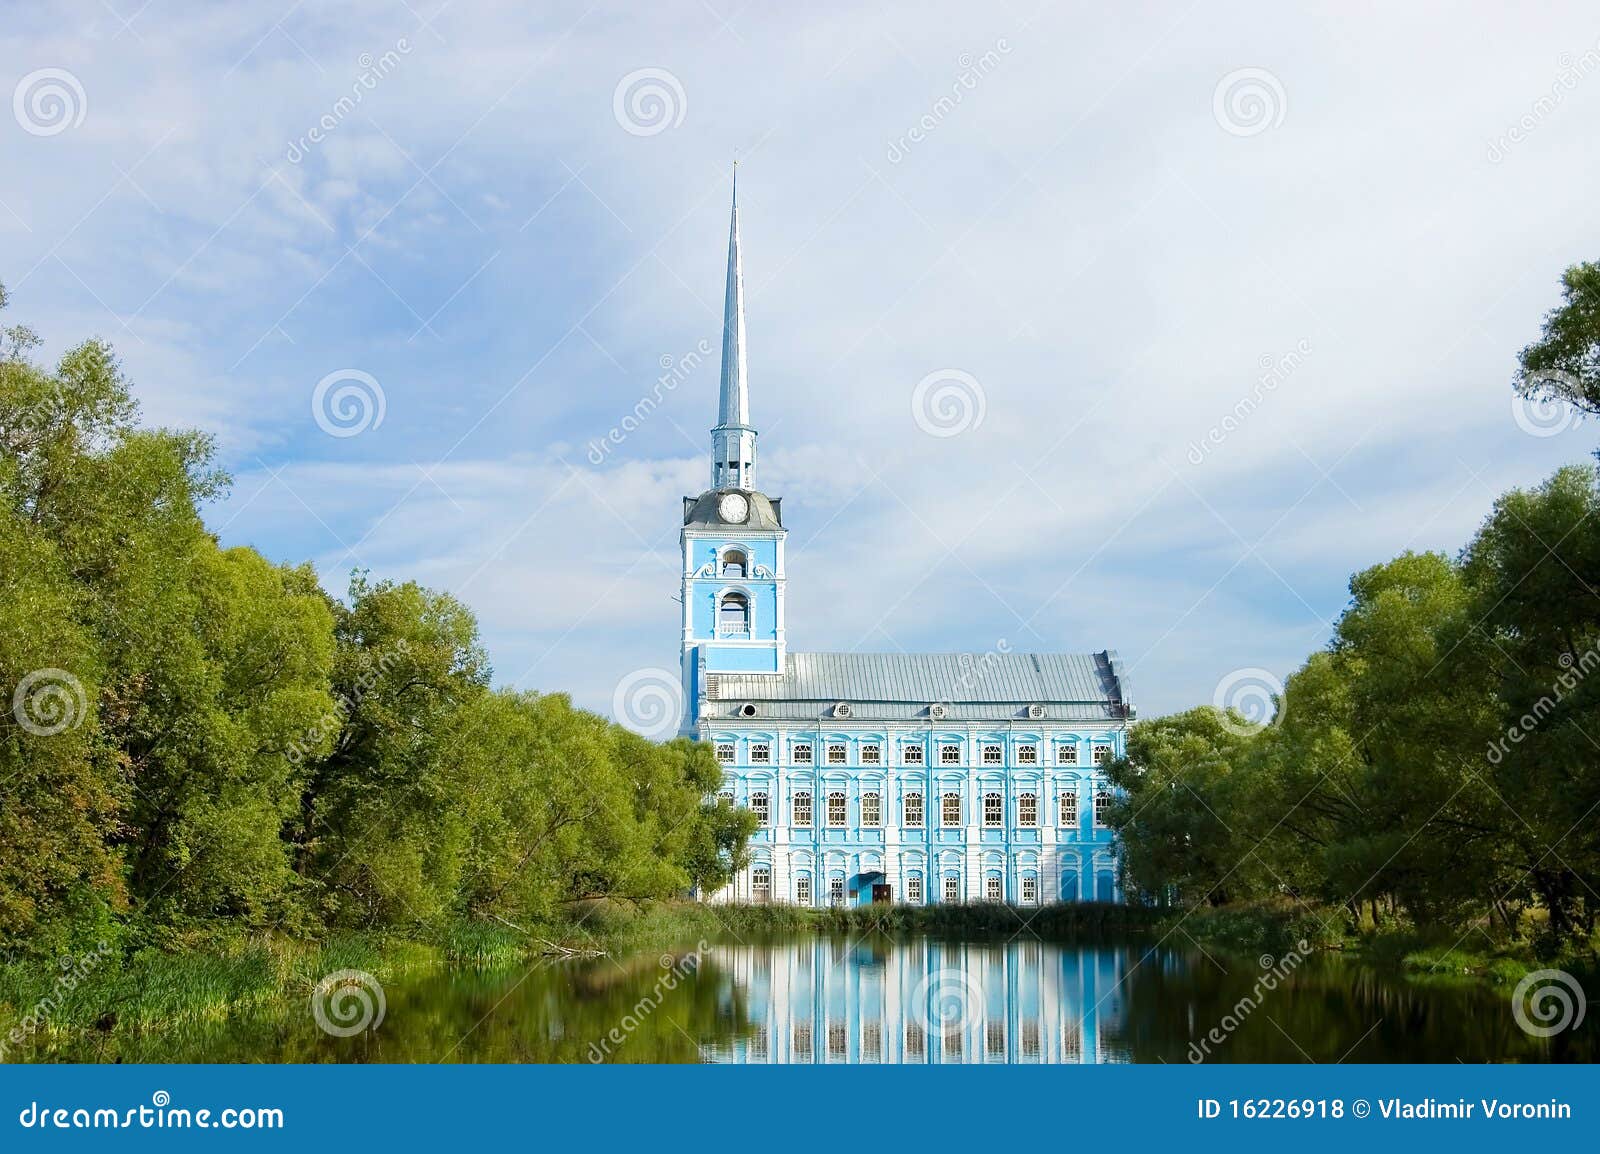 view of old church and reflexion in water